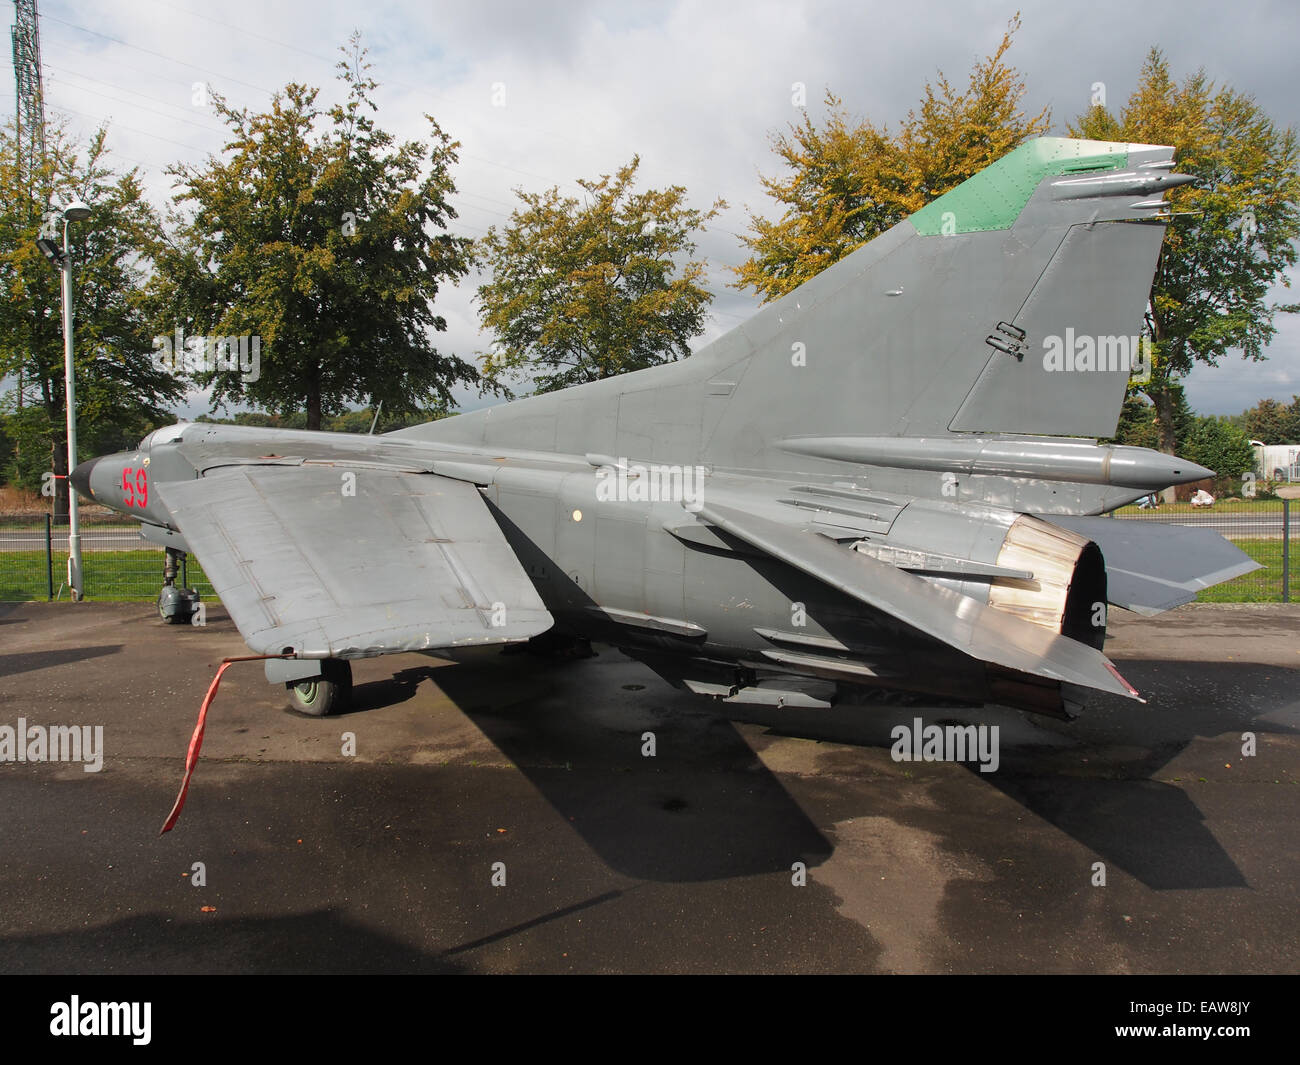 Mikoyan-Gurevich MiG-23MF Flogger at the Piet Smits collection at Baarlo in Netherlands, pic4 Stock Photo